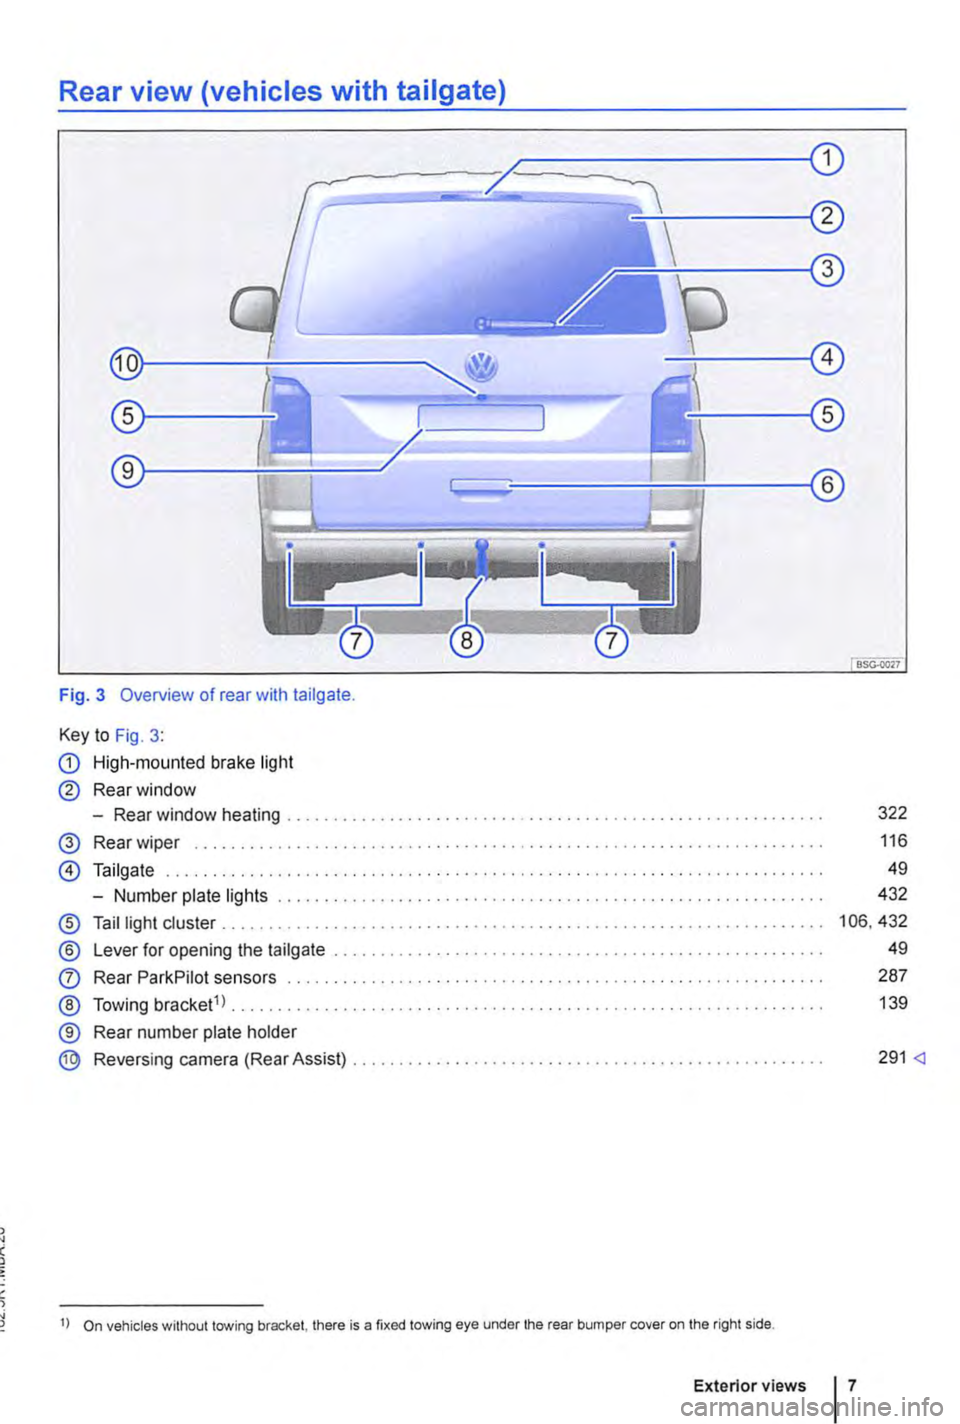 VOLKSWAGEN TRANSPORTER 2011  Owners Manual Rear view (vehicles with tailgate) 
Fig. 3 Overview of rear with tailgate. 
Key to Fig. 3: 
CD High-mounted brake light 
@ Rear window 
-Rear window heating ........................ . 
@ Rear wiper ..